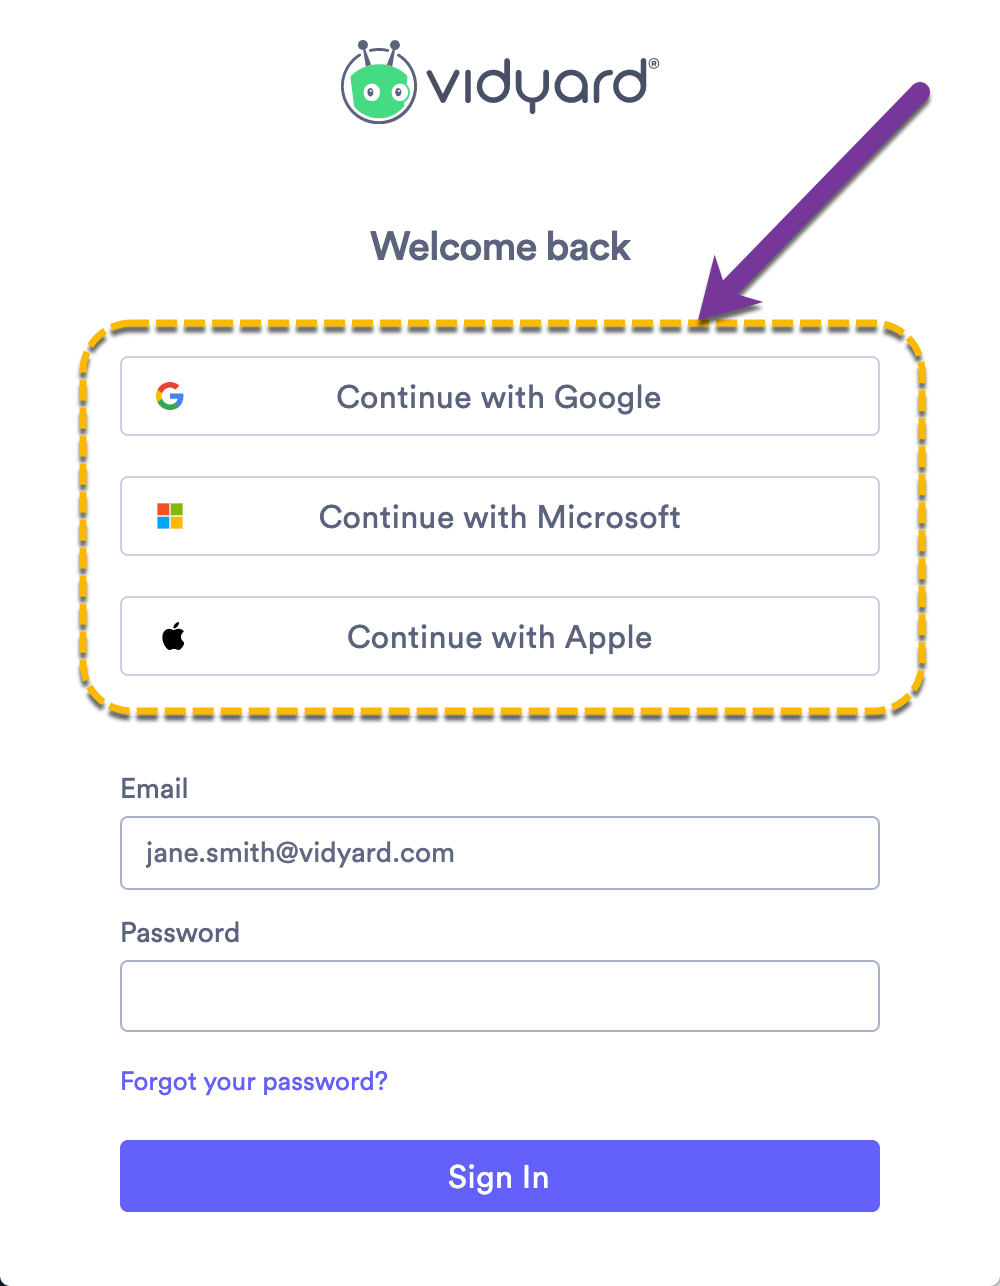 Options to sign in to Vidyard with a third-party service like your existing Google, Microsoft or Apple account